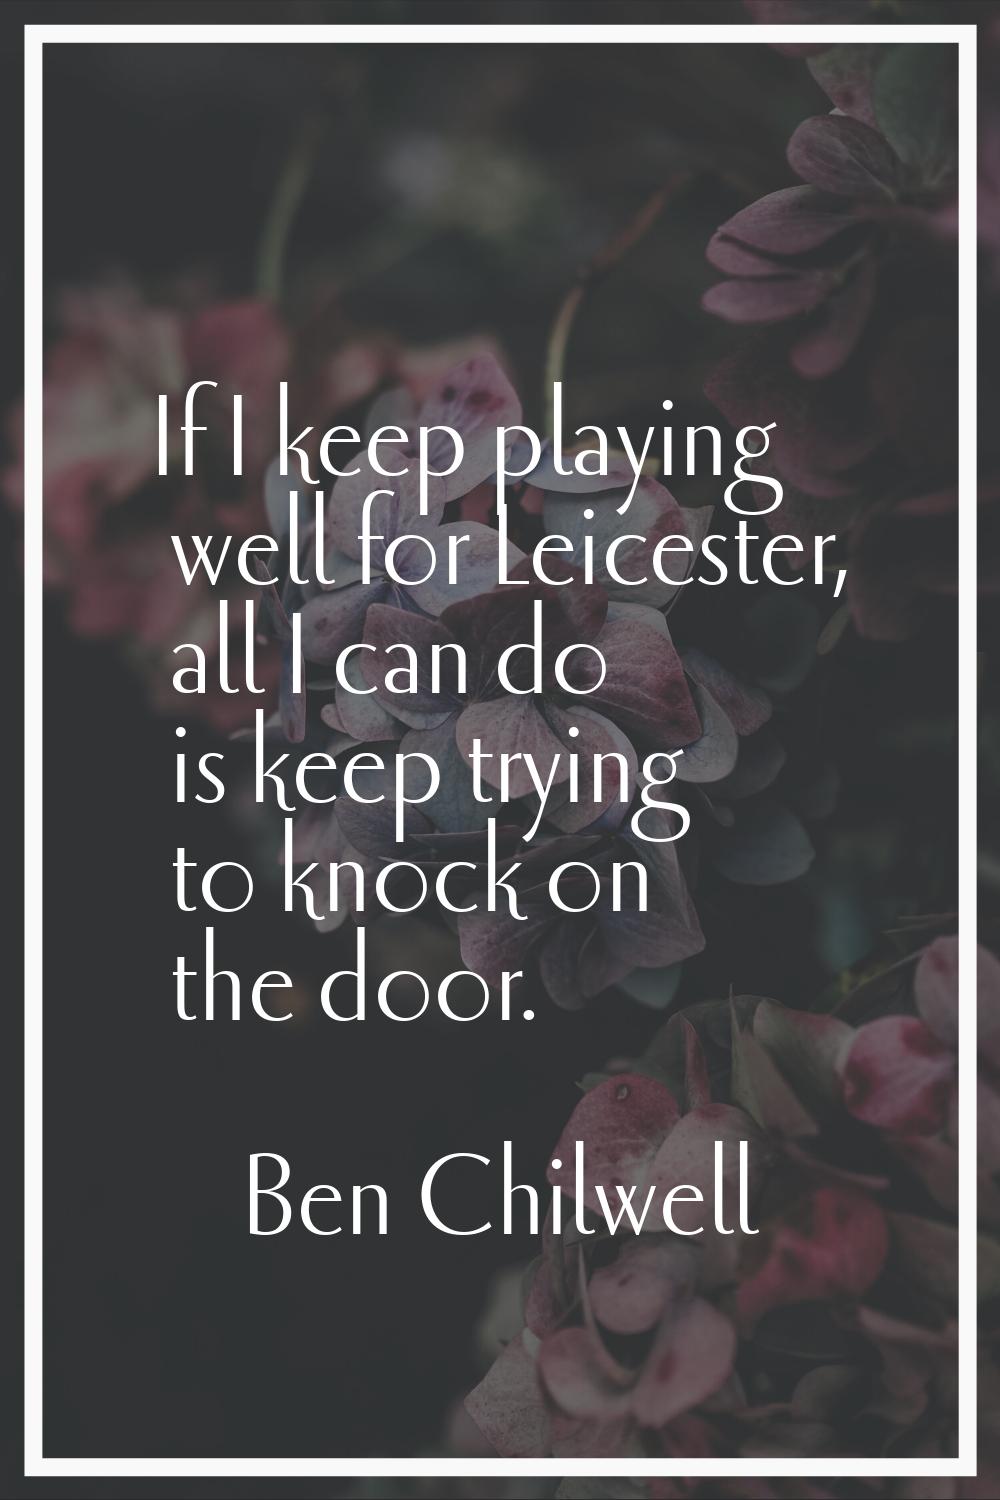 If I keep playing well for Leicester, all I can do is keep trying to knock on the door.